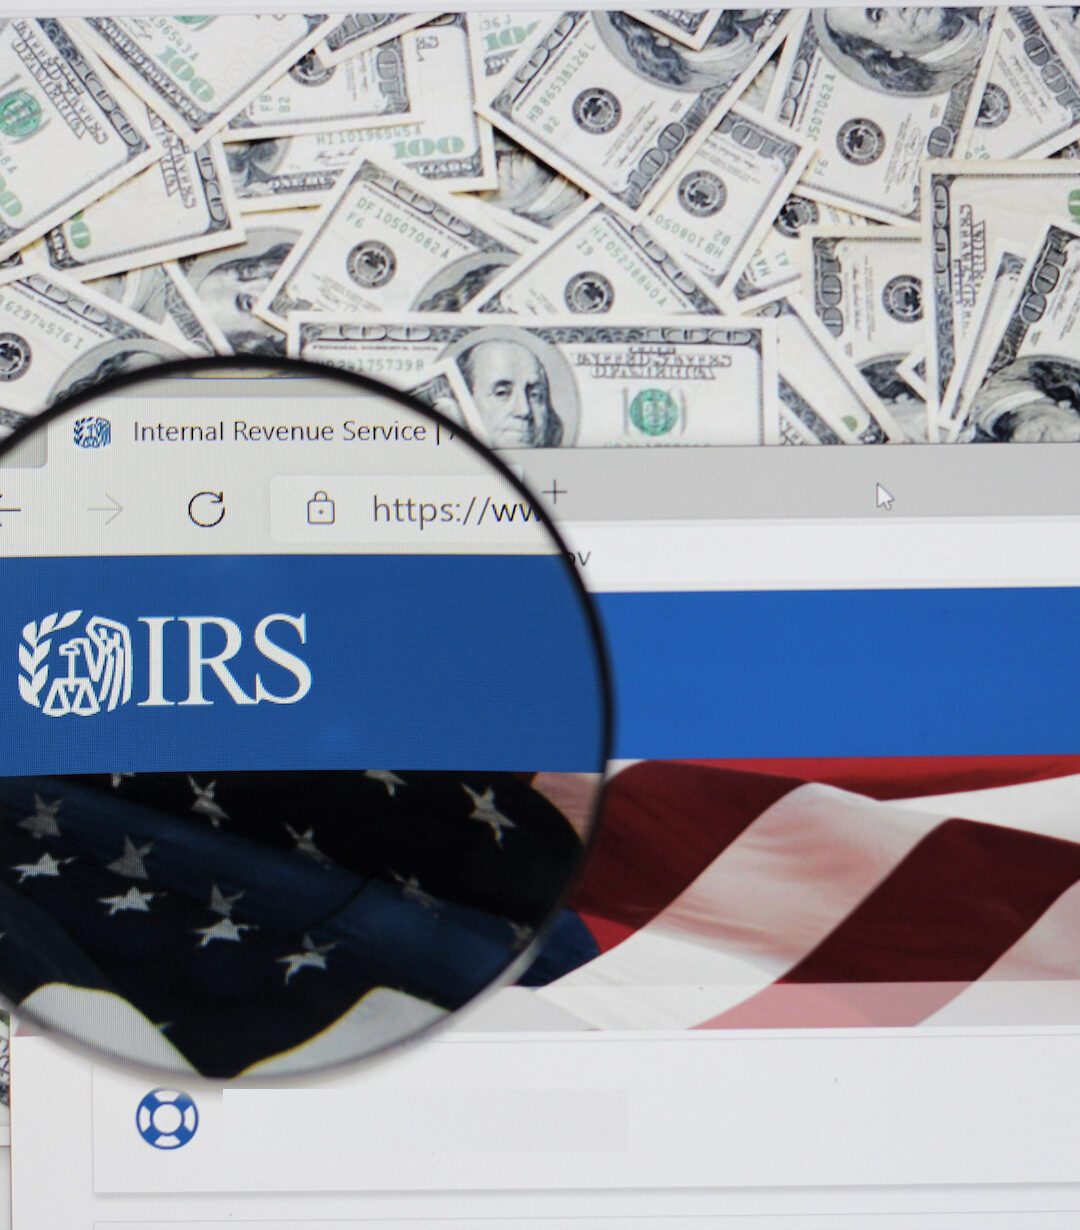 Upcoming Industry Day for IRS $2.6-Billion IT Contract